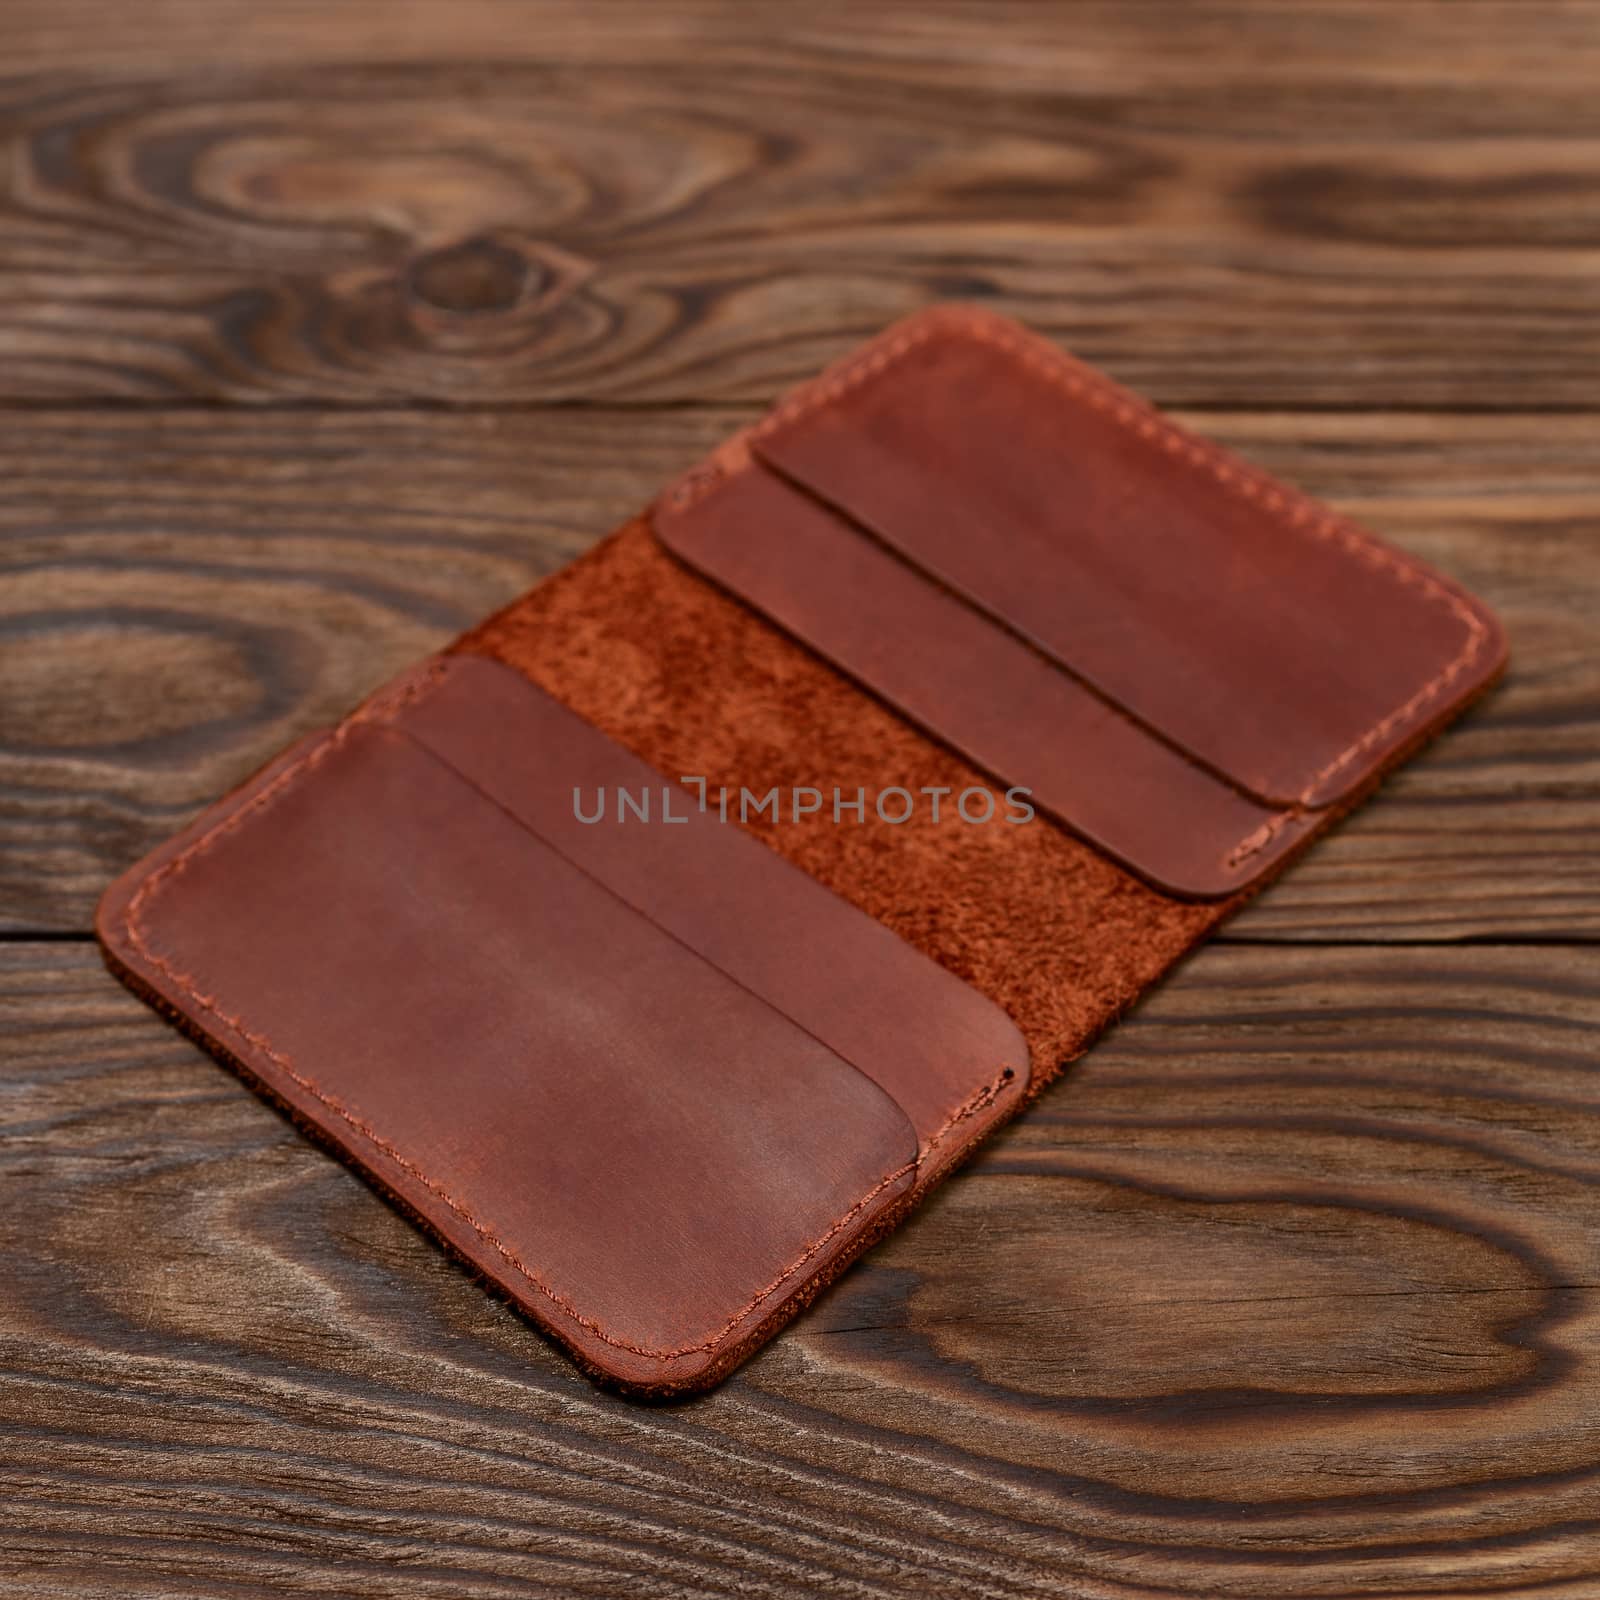 Handmade ginger colour leather cardholder on wooden background. Cardholder have 4 pockets for cards. Stock photo with soft focus background.